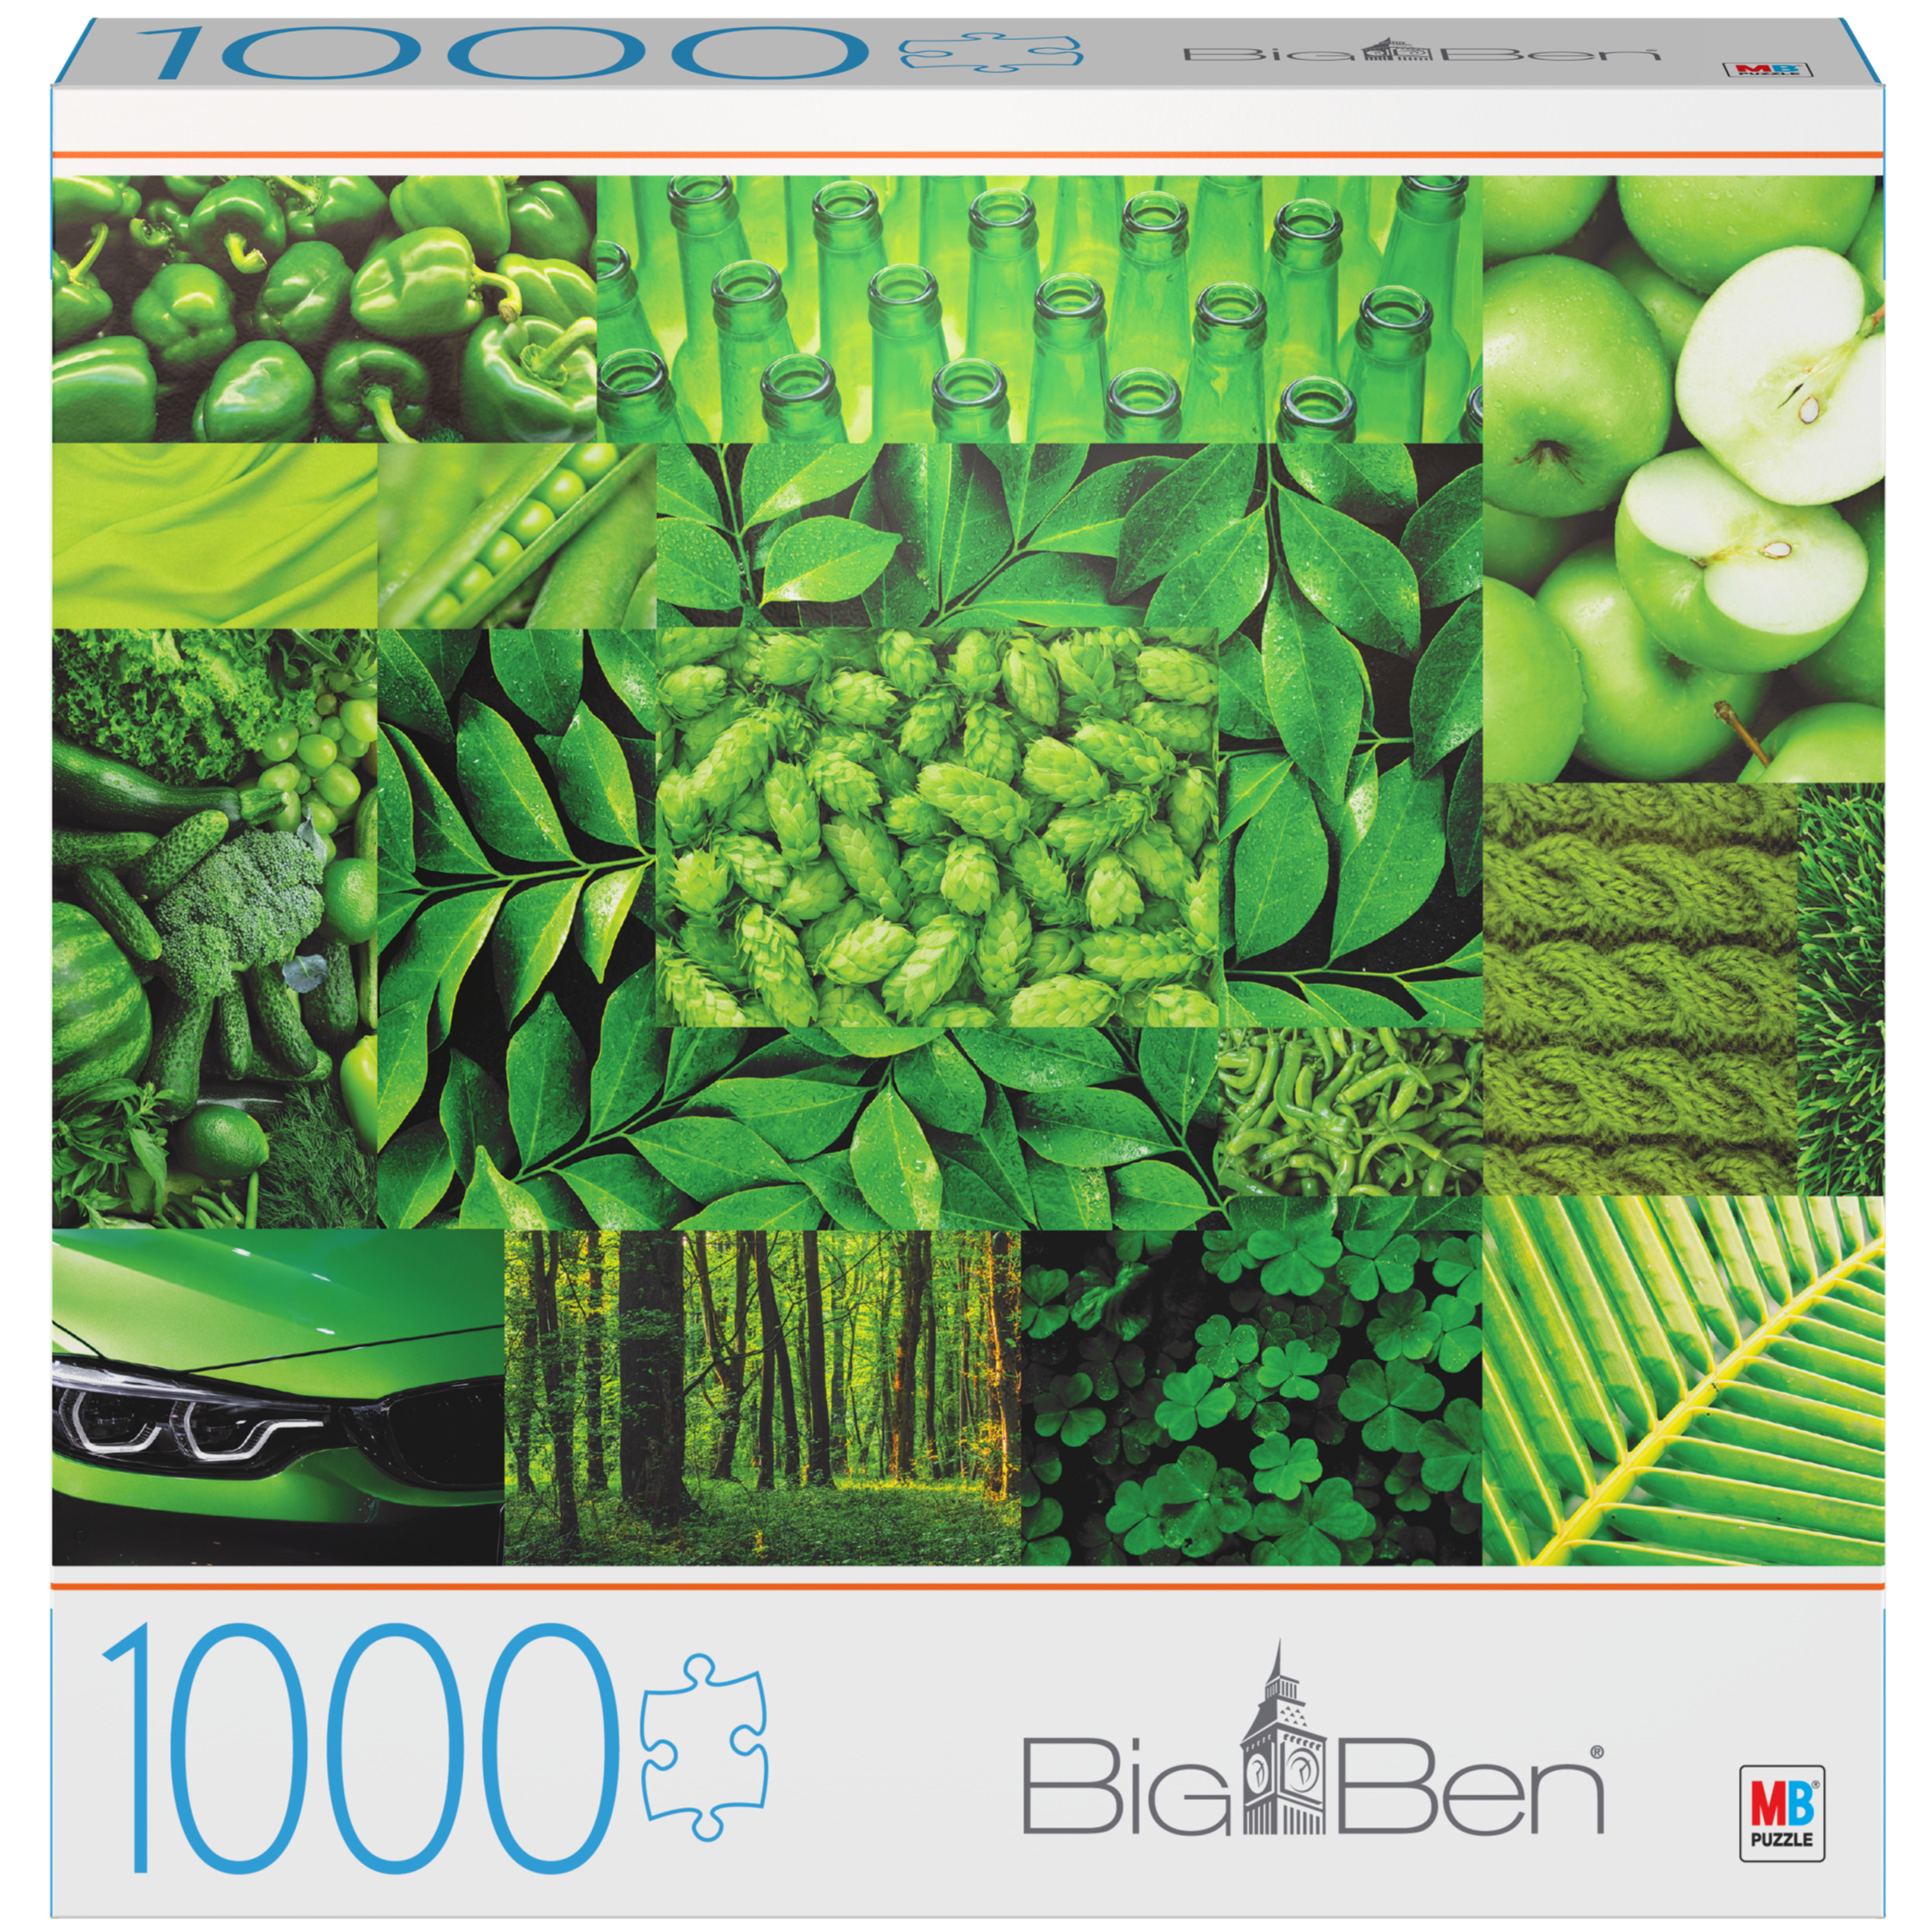 Big Ben Milton Bradley 1000-Piece Jigsaw Puzzle, for Adults and Kids Ages 8 and up (Styles Will Vary) - image 1 of 8